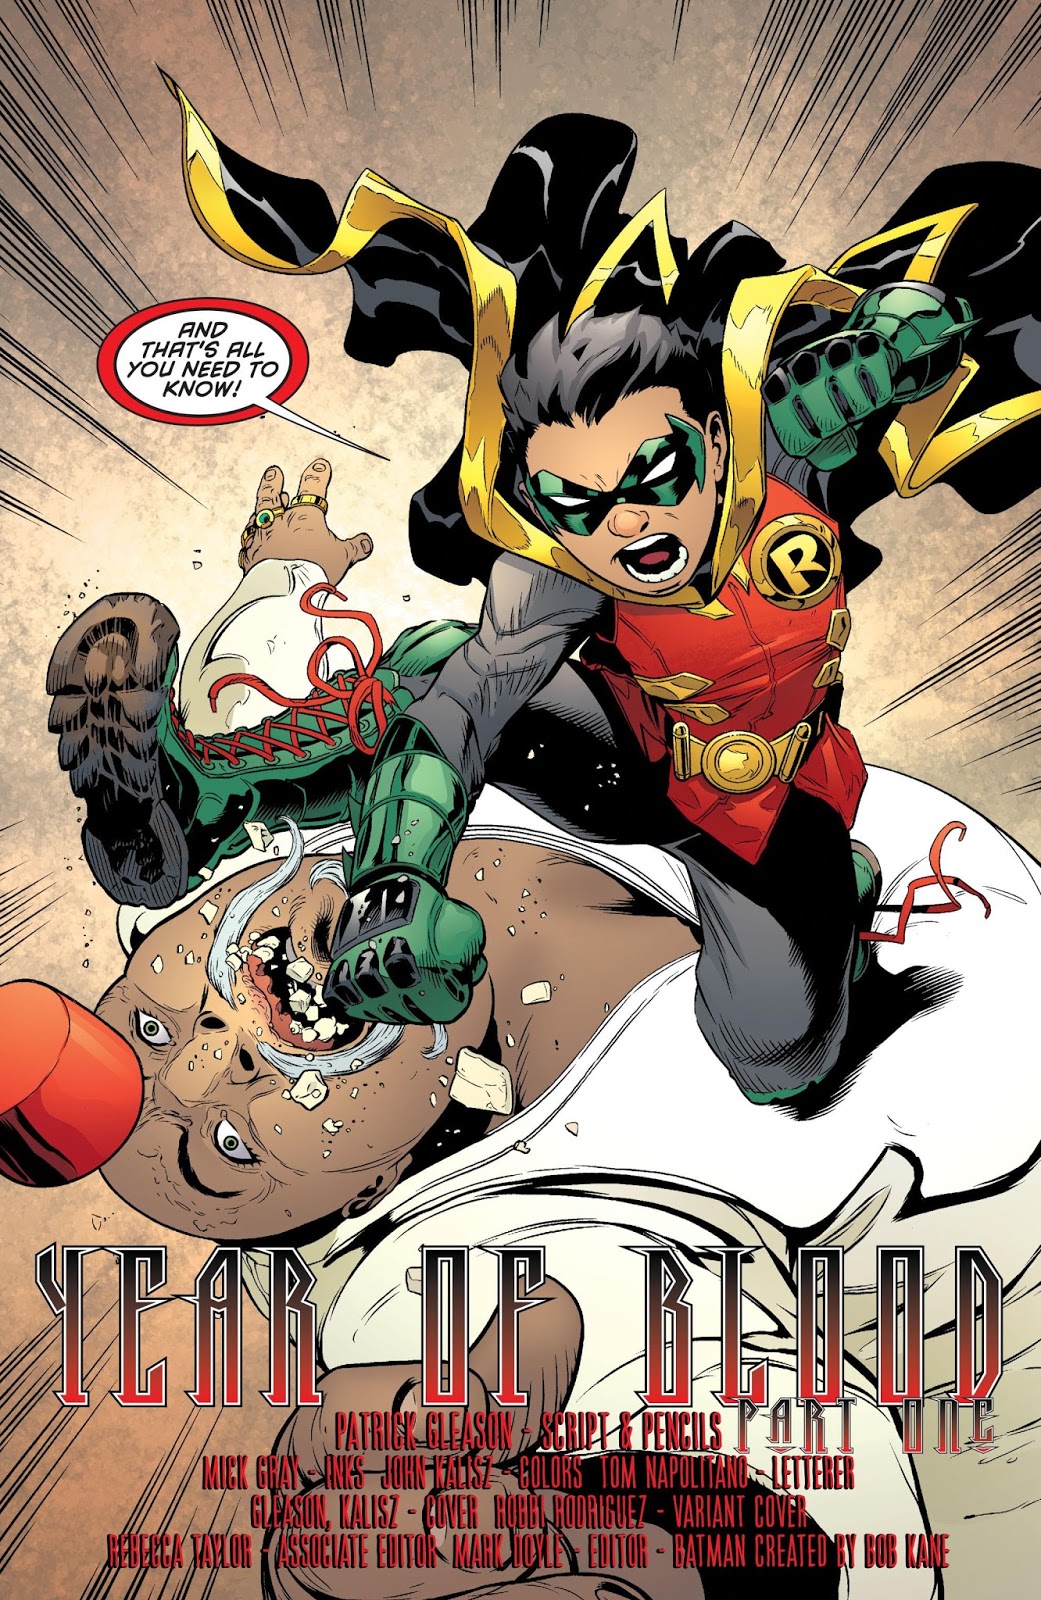 Weird Science DC Comics: Robin: Son of Batman #1 Review and *SPOILERS*